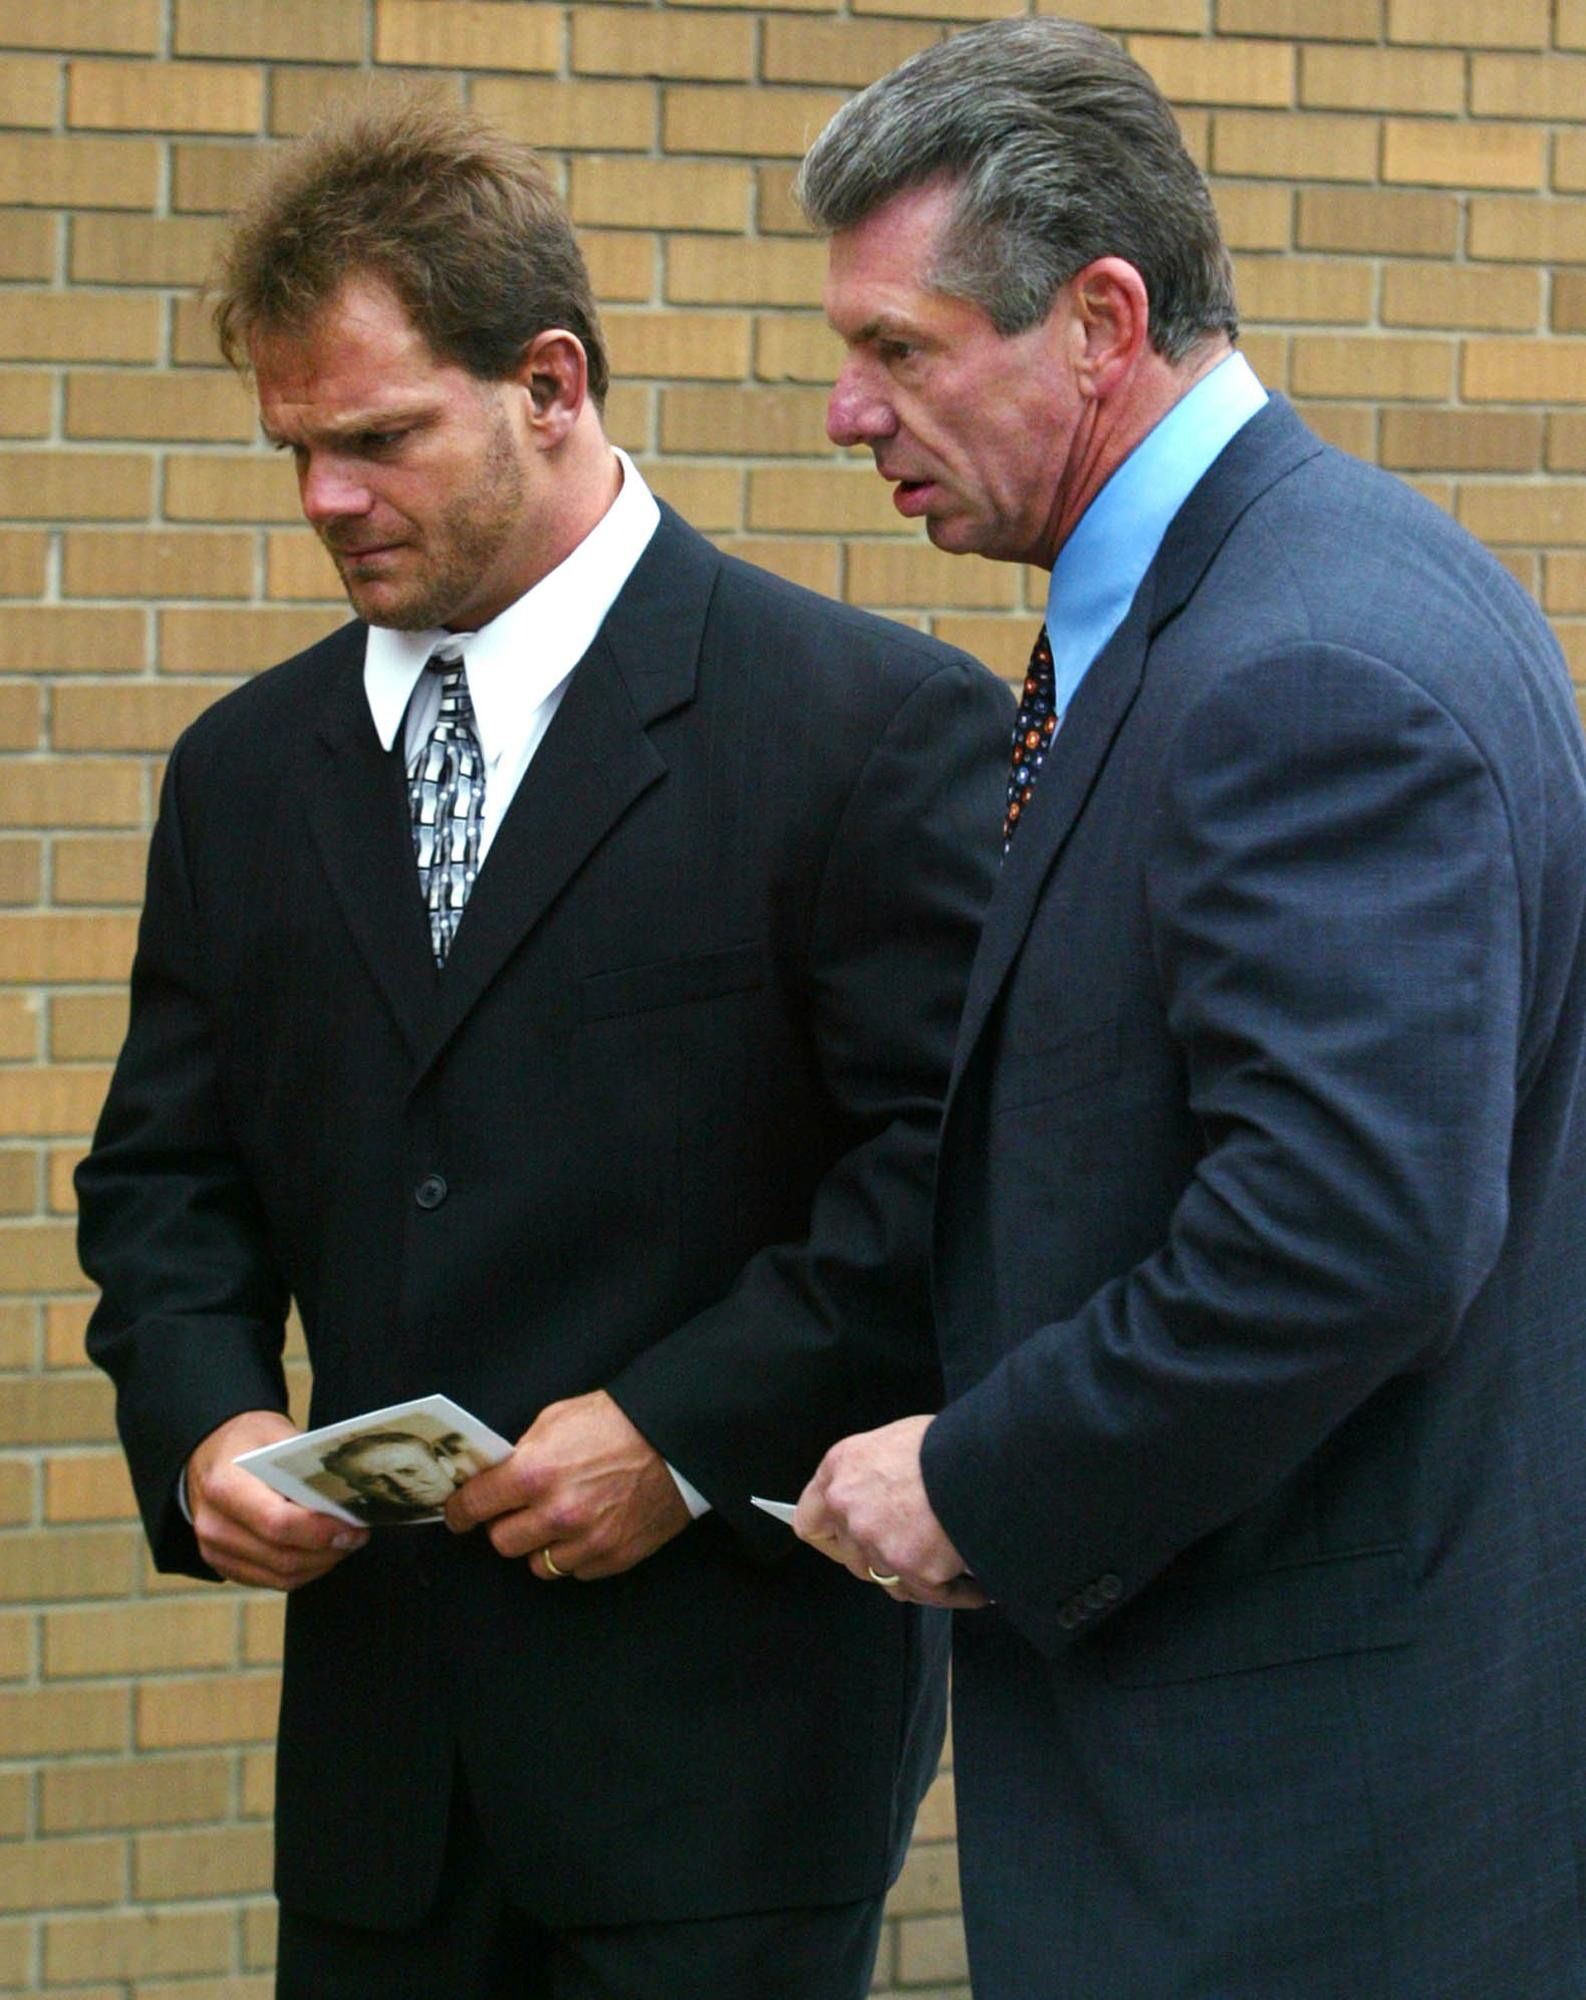 ** FILE ** World Wreslting Entertainment Chairman Vince McMahon, right and wrestler Chris Benoit, from Edmonton, make their way in to a memorial service for wrestling legend Stu Hart Thursday, October 23, 2003. Benoit has been found dead at his suburban Atlanta home along with his wife Nancy and son, World Wrestling Entertainment said Monday June 25, 2007. (AP Photo/Adrian Wyld, CP)